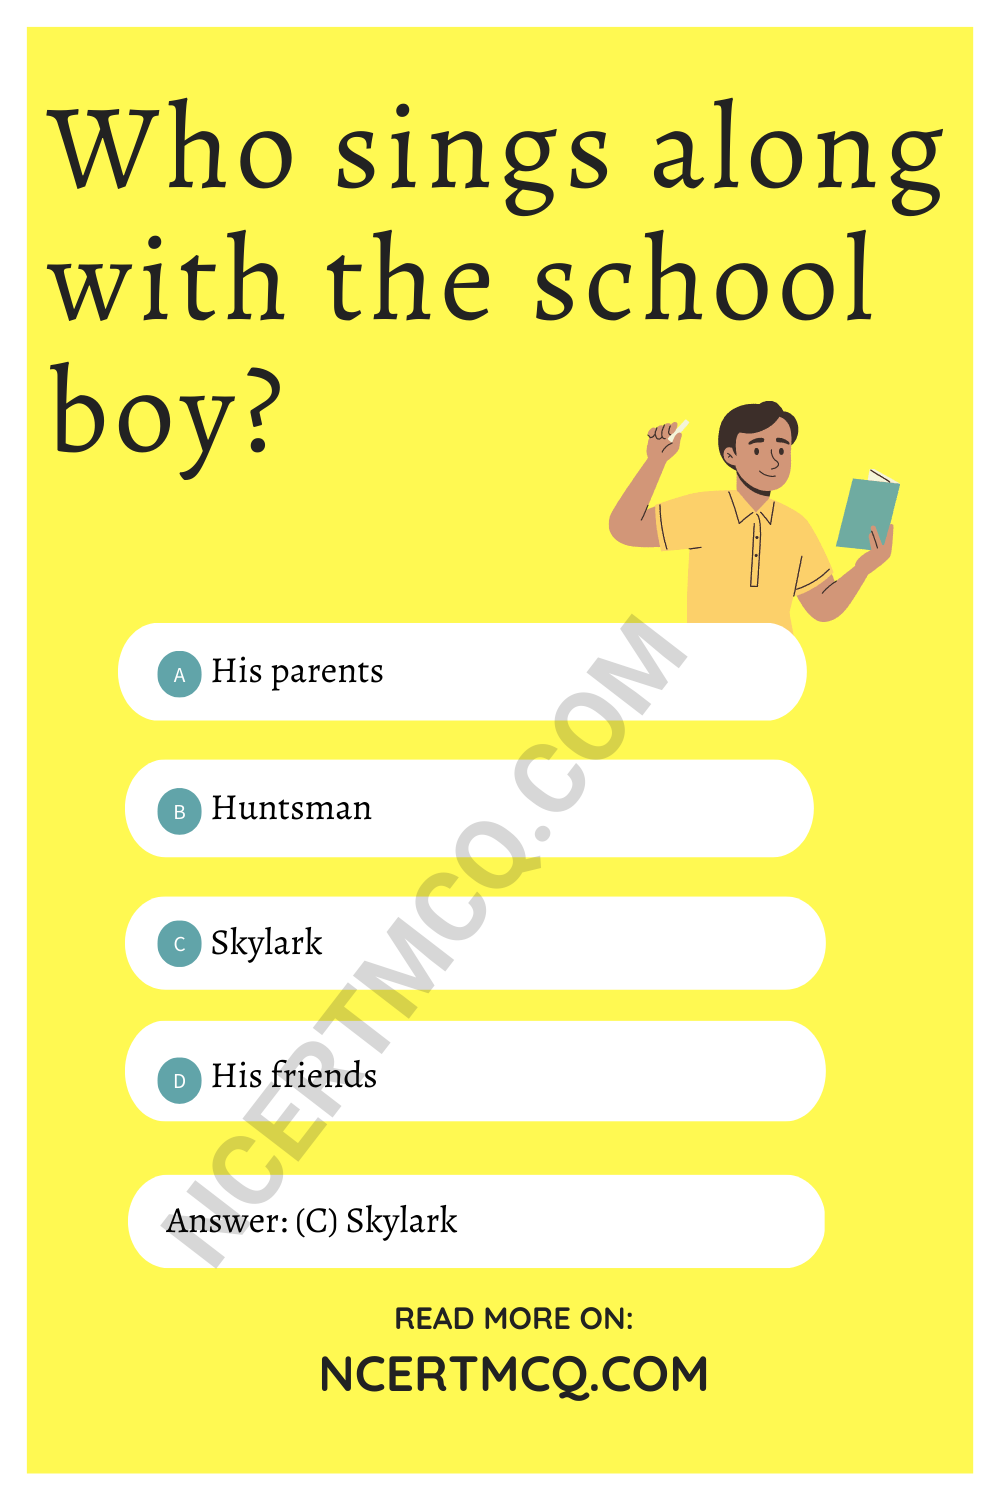 Who sings along with the school boy?